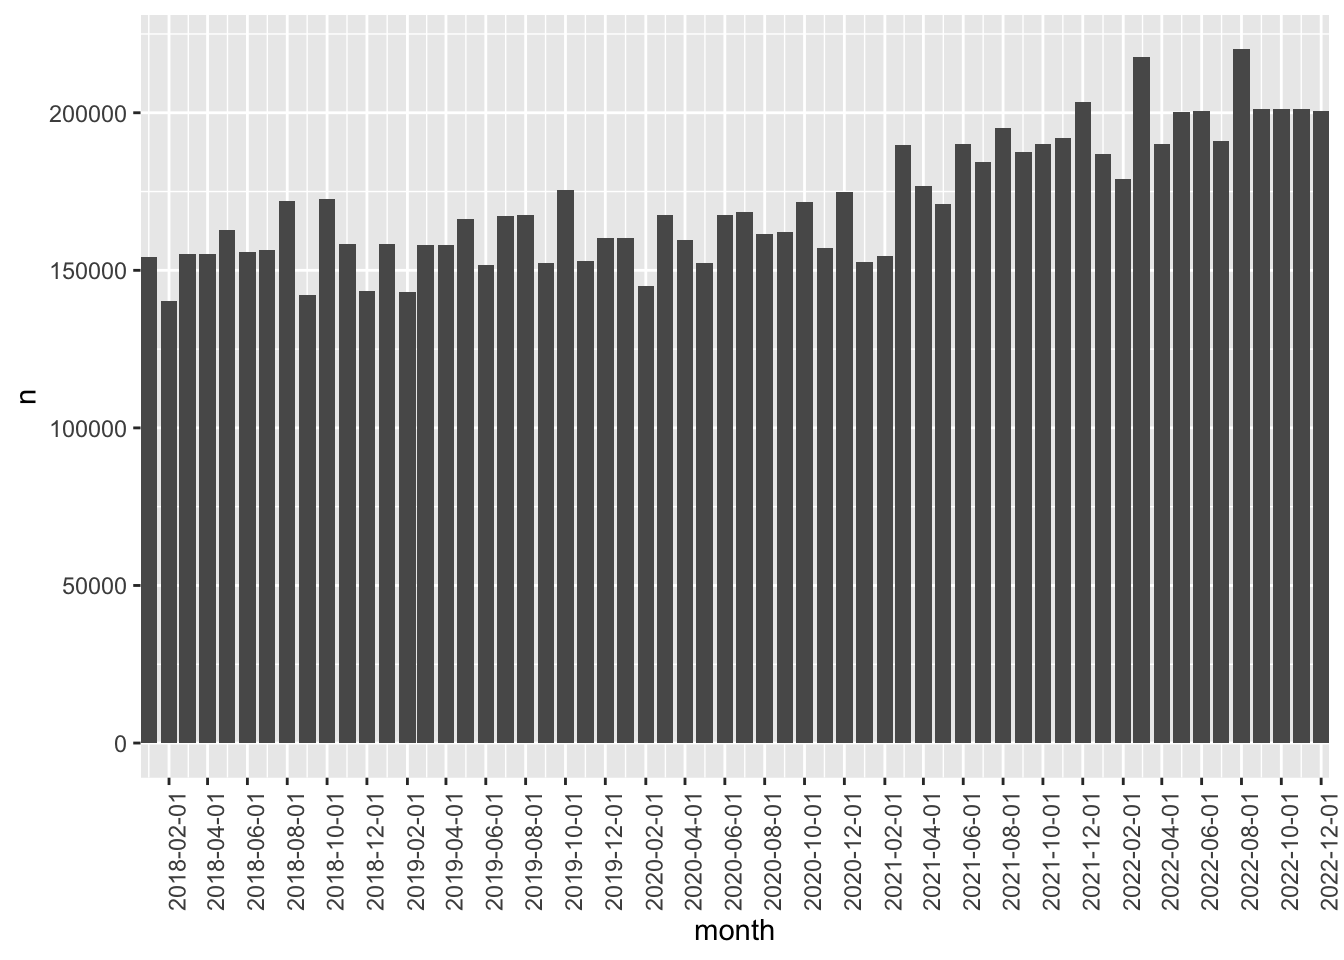 A plot of the number of observations on the CRSP daily stock file by month for years 2018 through 2022. Values fluctuate from 150,000 to over 200,000 and tend to increase over time. Plot of part of an exercise assigned to students to relate what is shown to the underlying data.